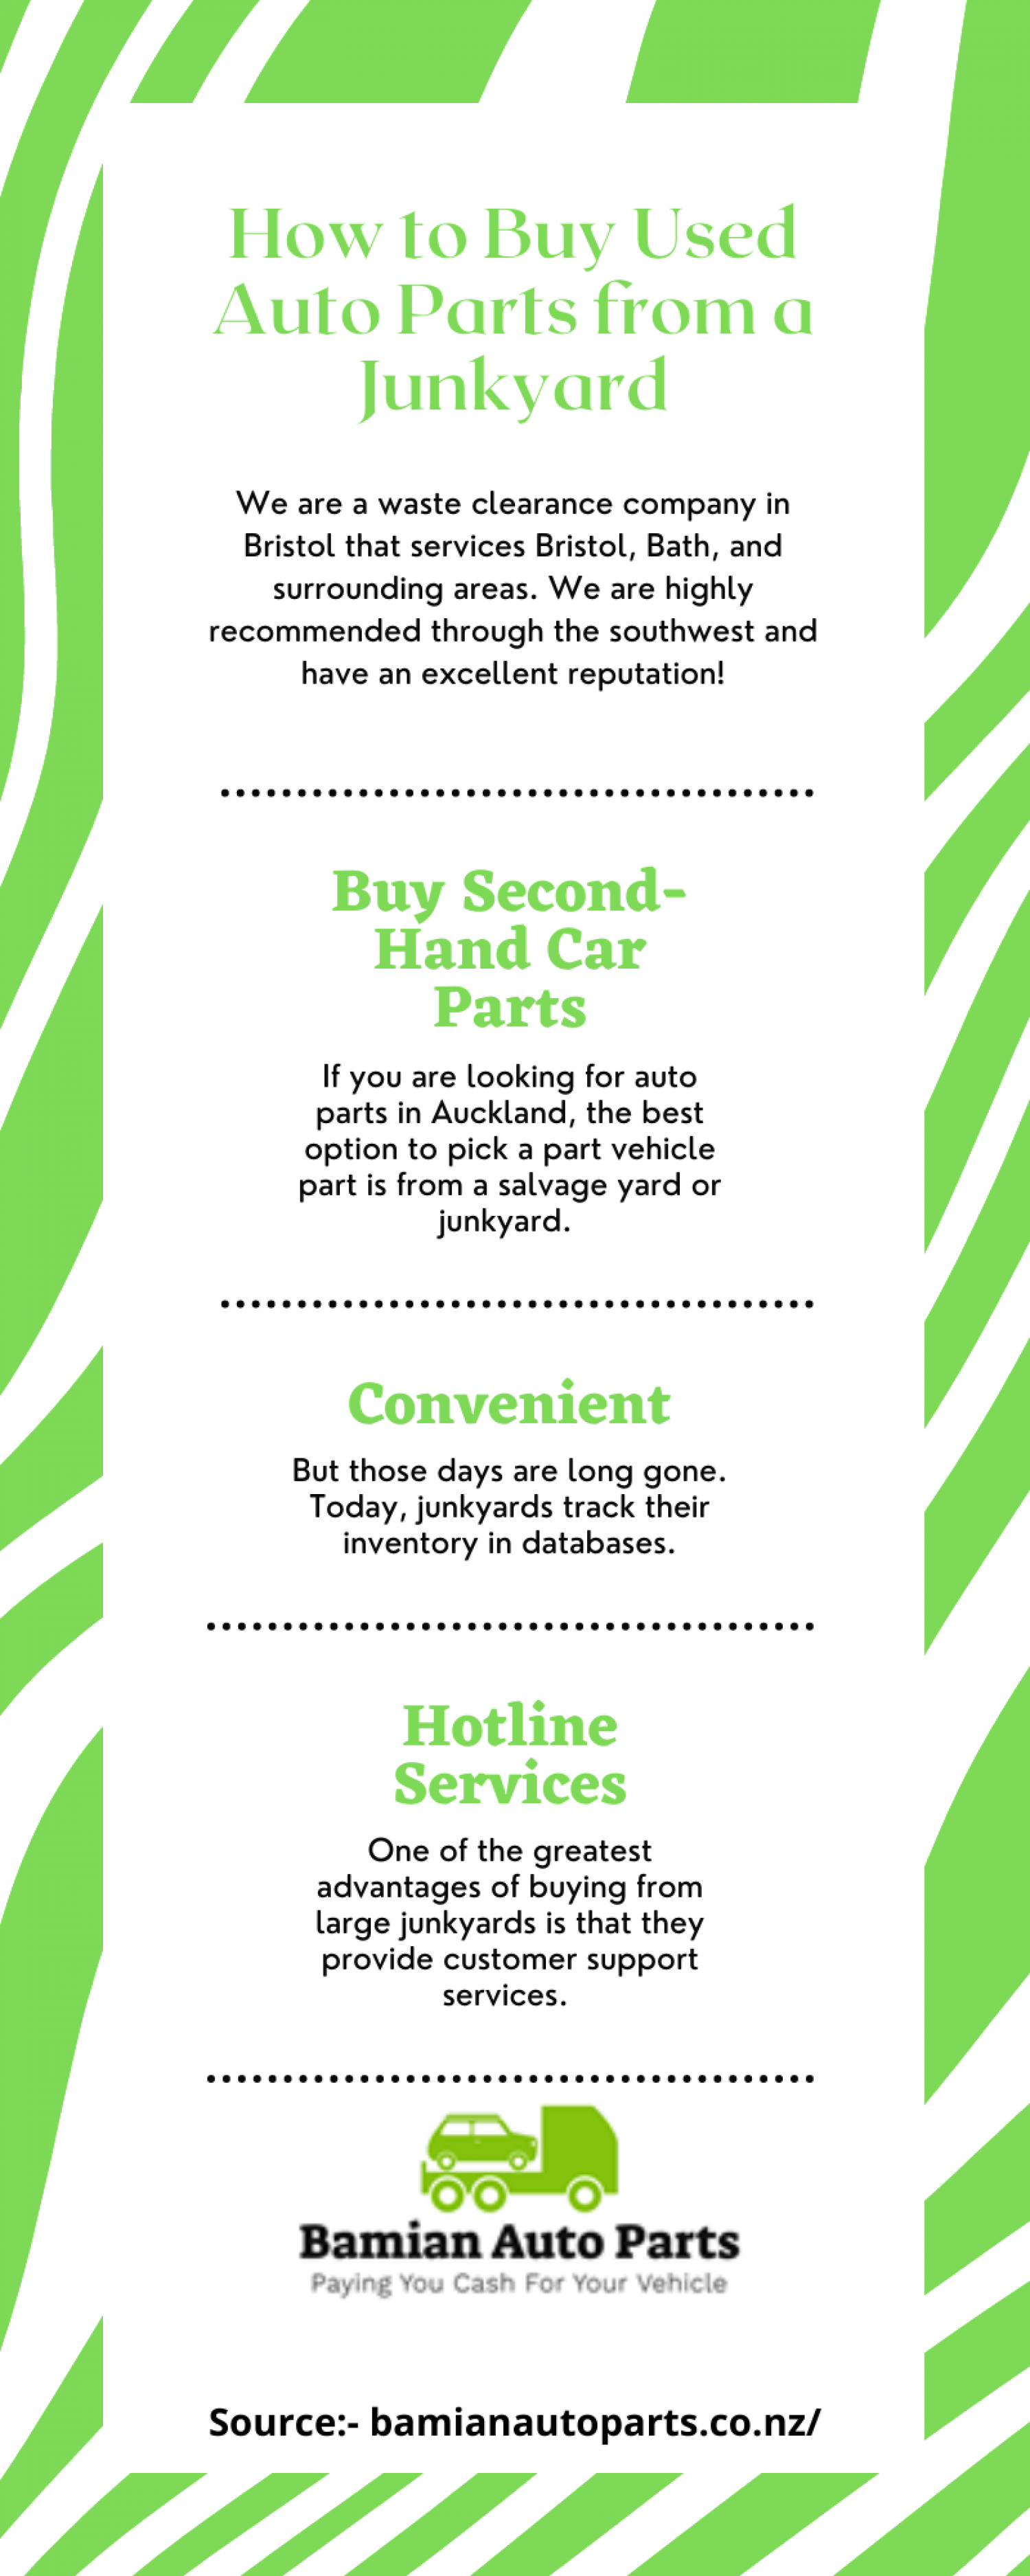 Second Hand Auto Parts in Auckland | Bamian Auto Parts Infographic